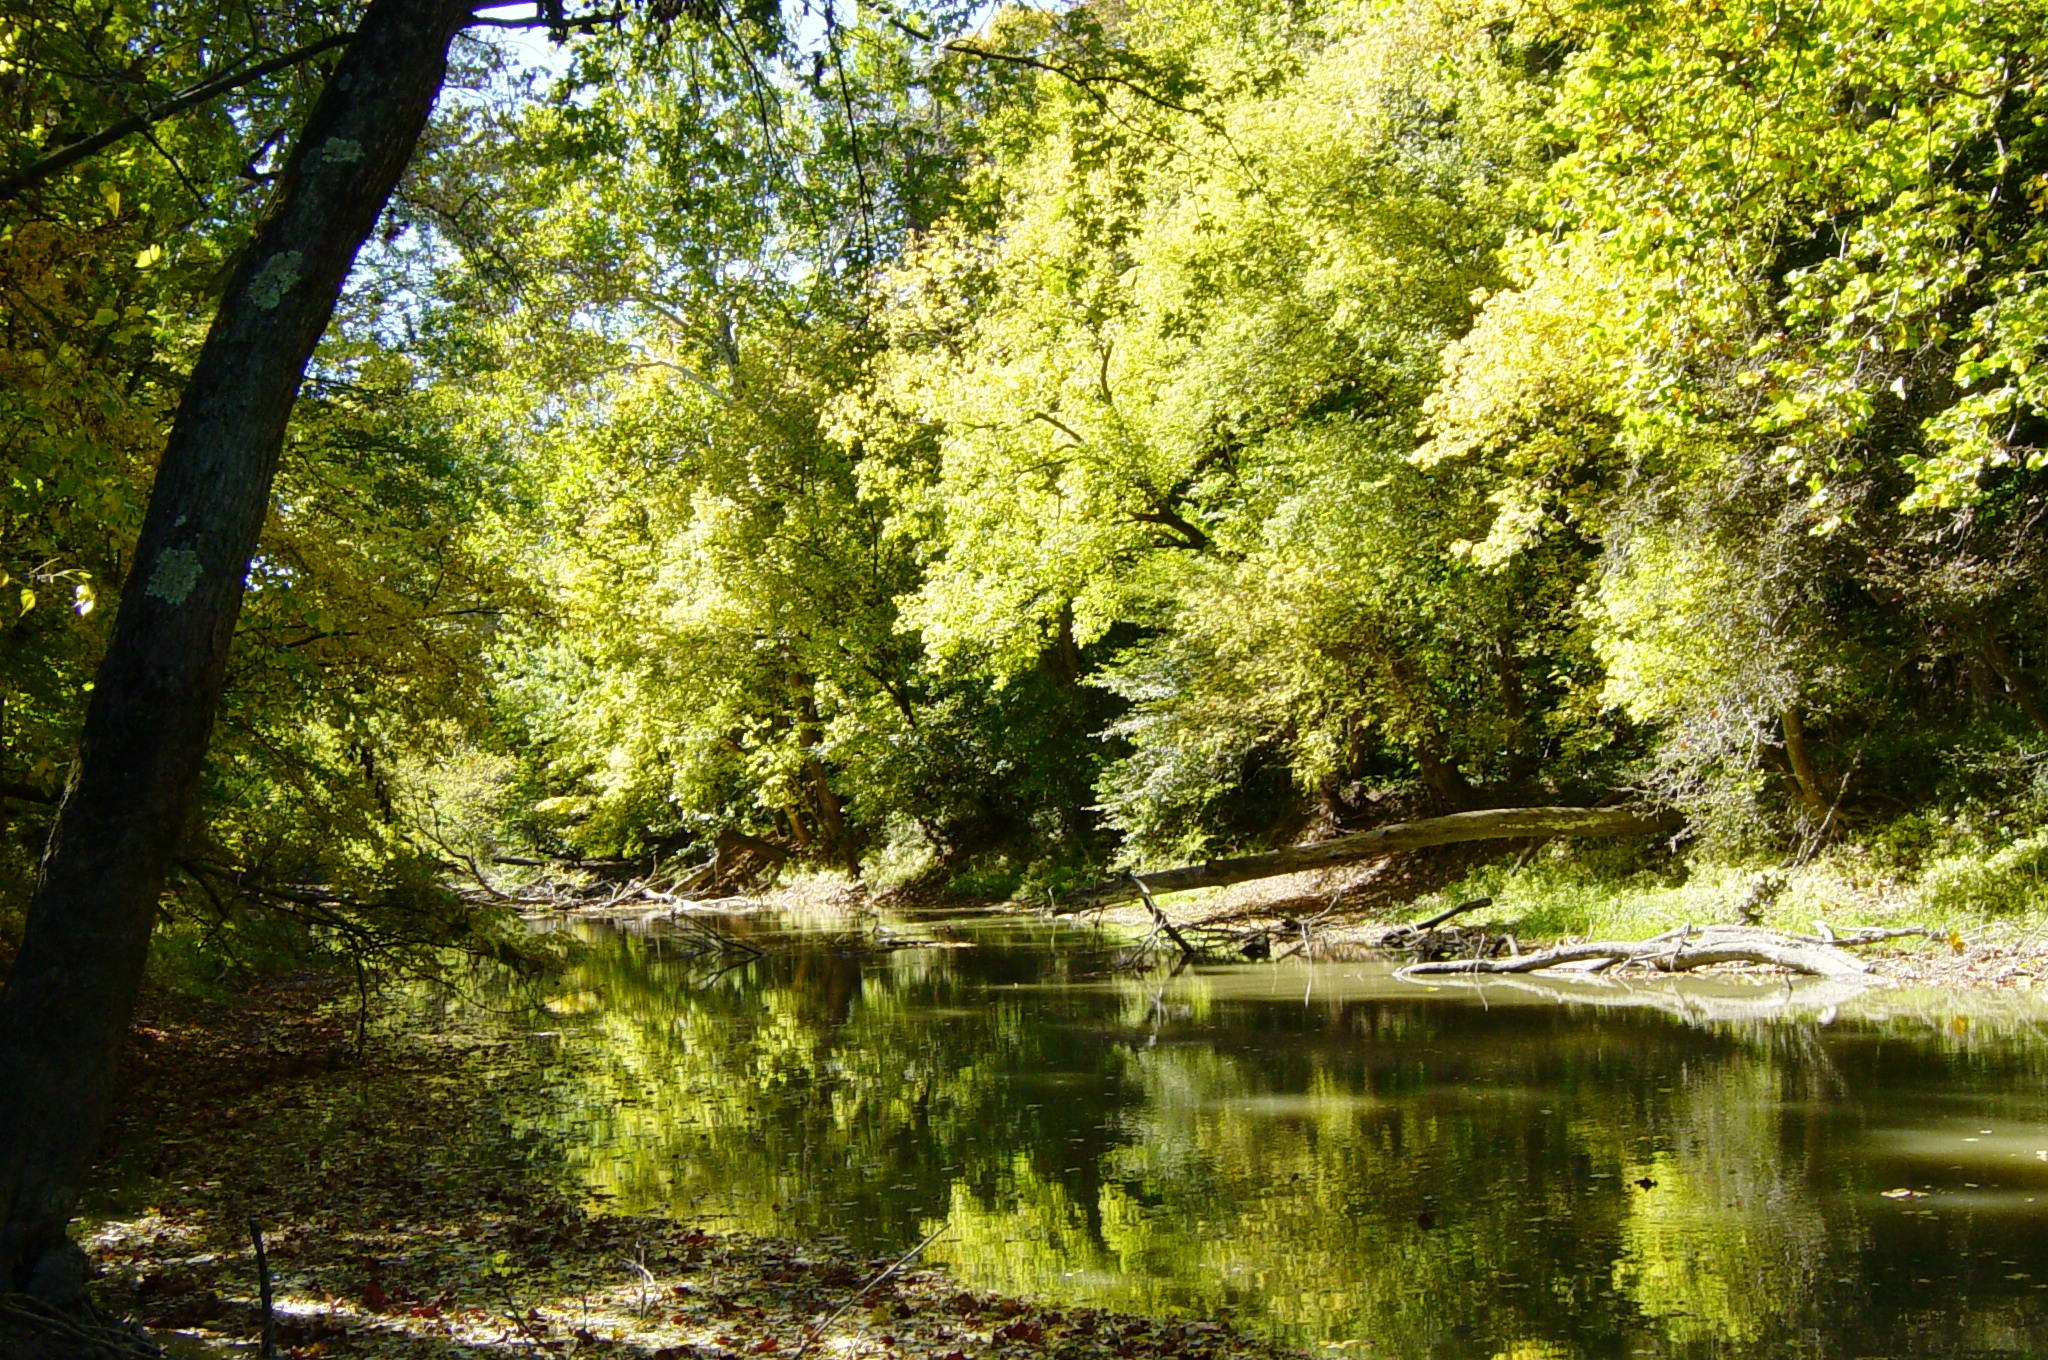 File:Tiffin River at Goll Woods State Nature Preserve in Ohio.jpg ...